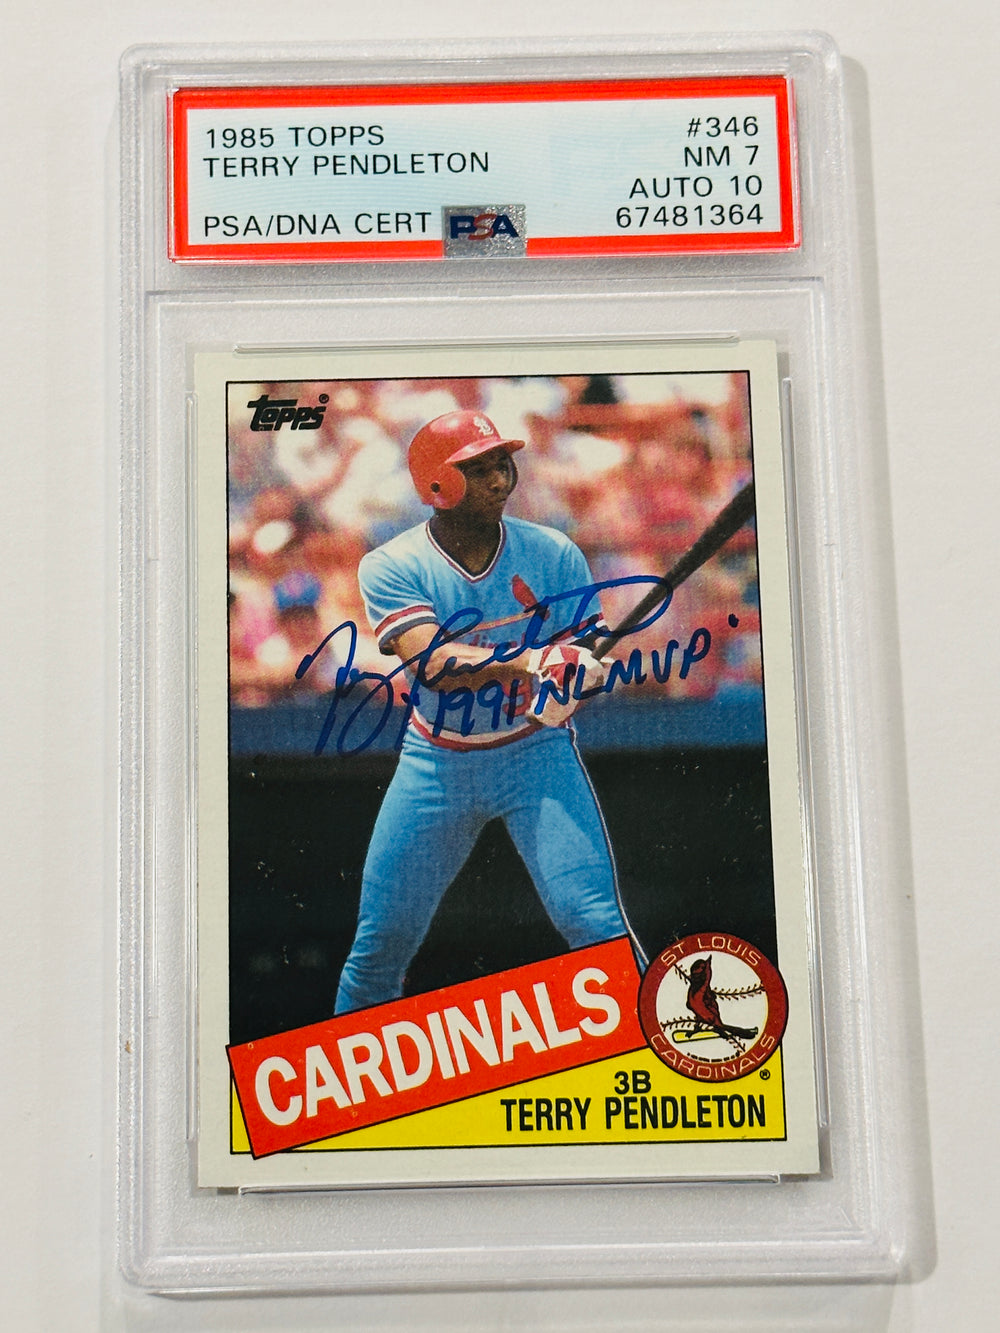 Terry Pendleton 1985 Topps Signed Cardinals Rookie Card PSA 7, Auto 10